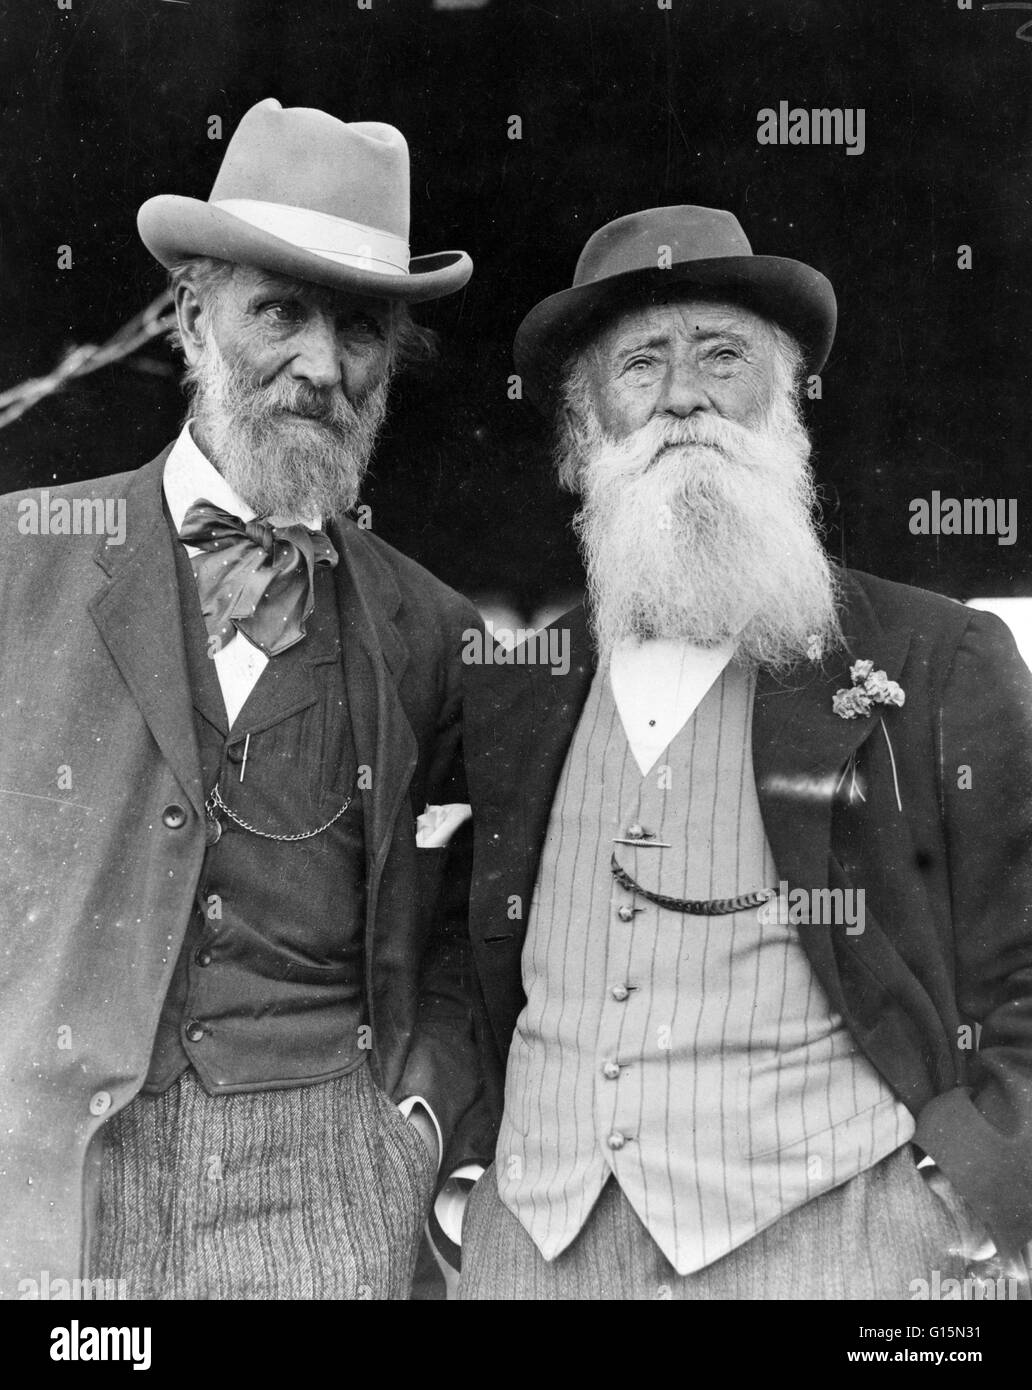 John Muir (April 21, 1838 - December 24, 1914) was a Scottish-born American naturalist, author, and early advocate of preservation of wilderness in the United States. His letters, essays, and books telling of his adventures in nature, especially in the Si Stock Photo